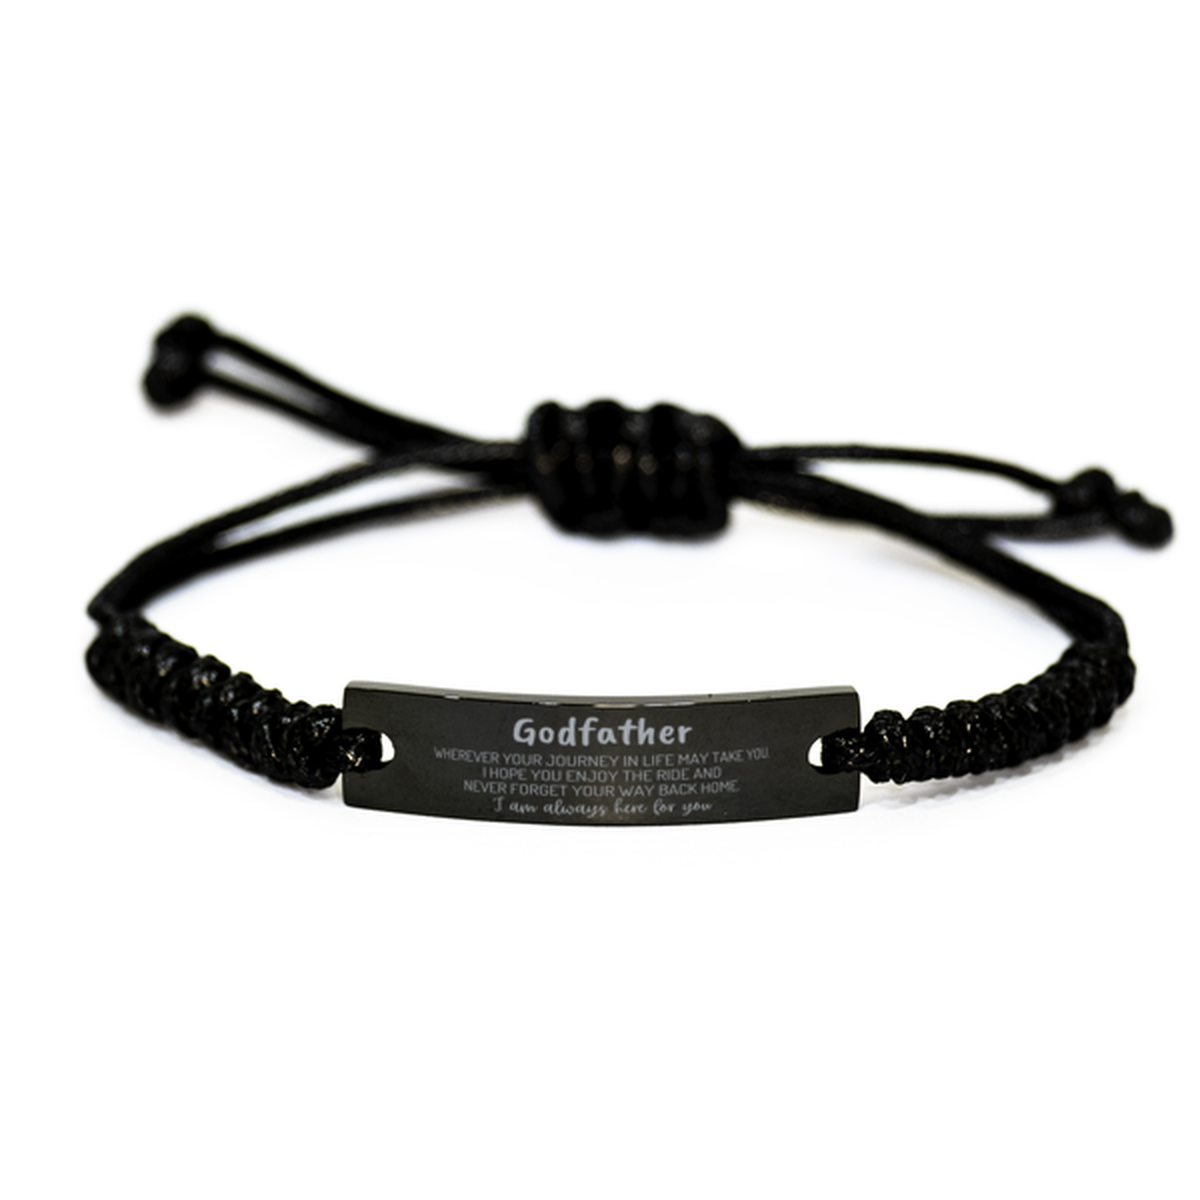 Godfather wherever your journey in life may take you, I am always here for you Godfather Black Rope Bracelet, Awesome Christmas Gifts For Godfather, Godfather Birthday Gifts for Men Women Family Loved One